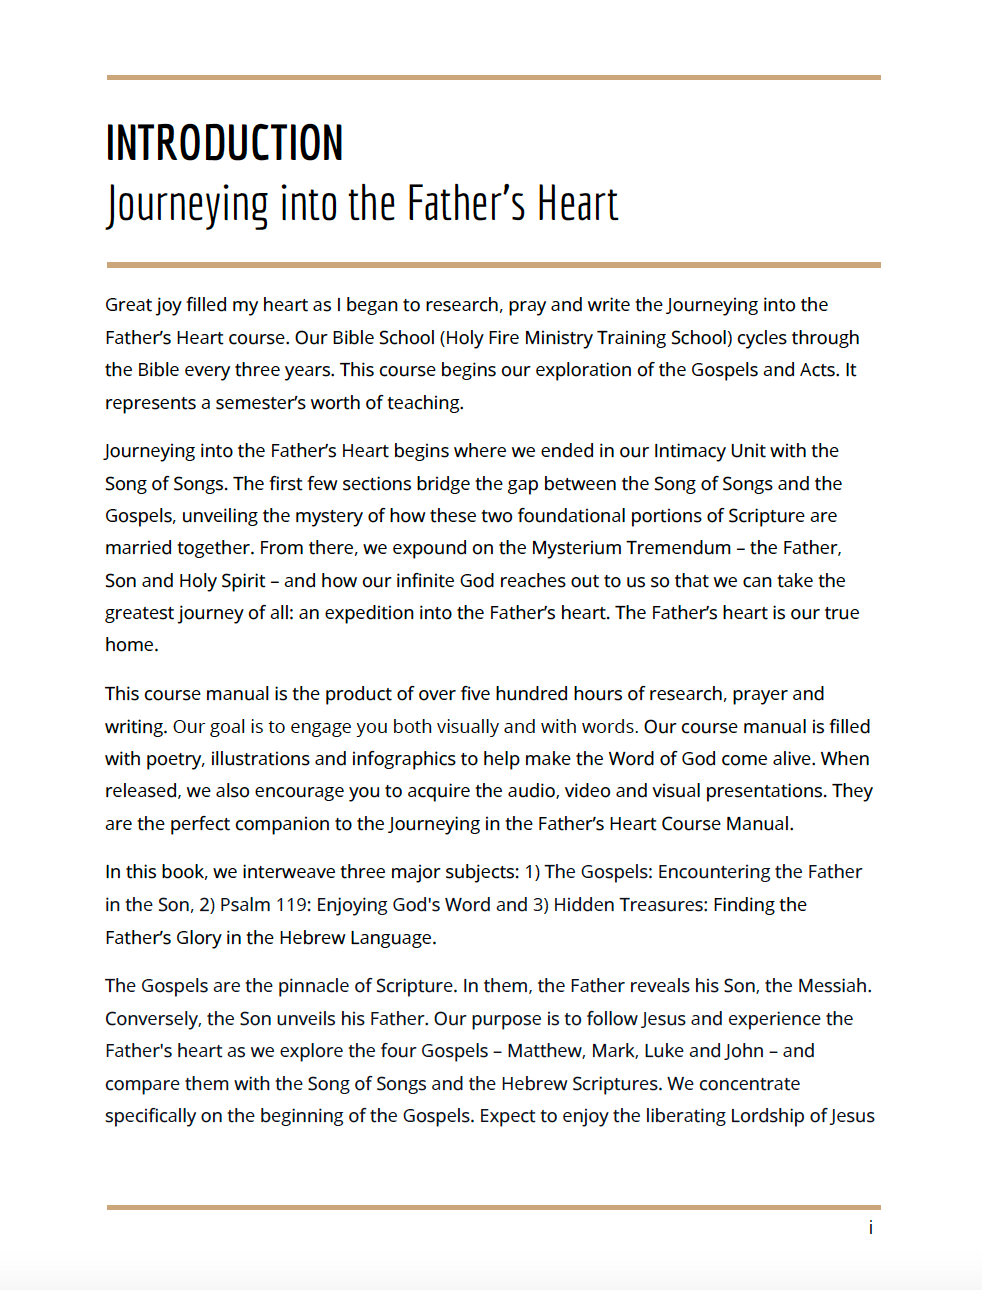 Journeying into the Father's Heart (Course Manual)